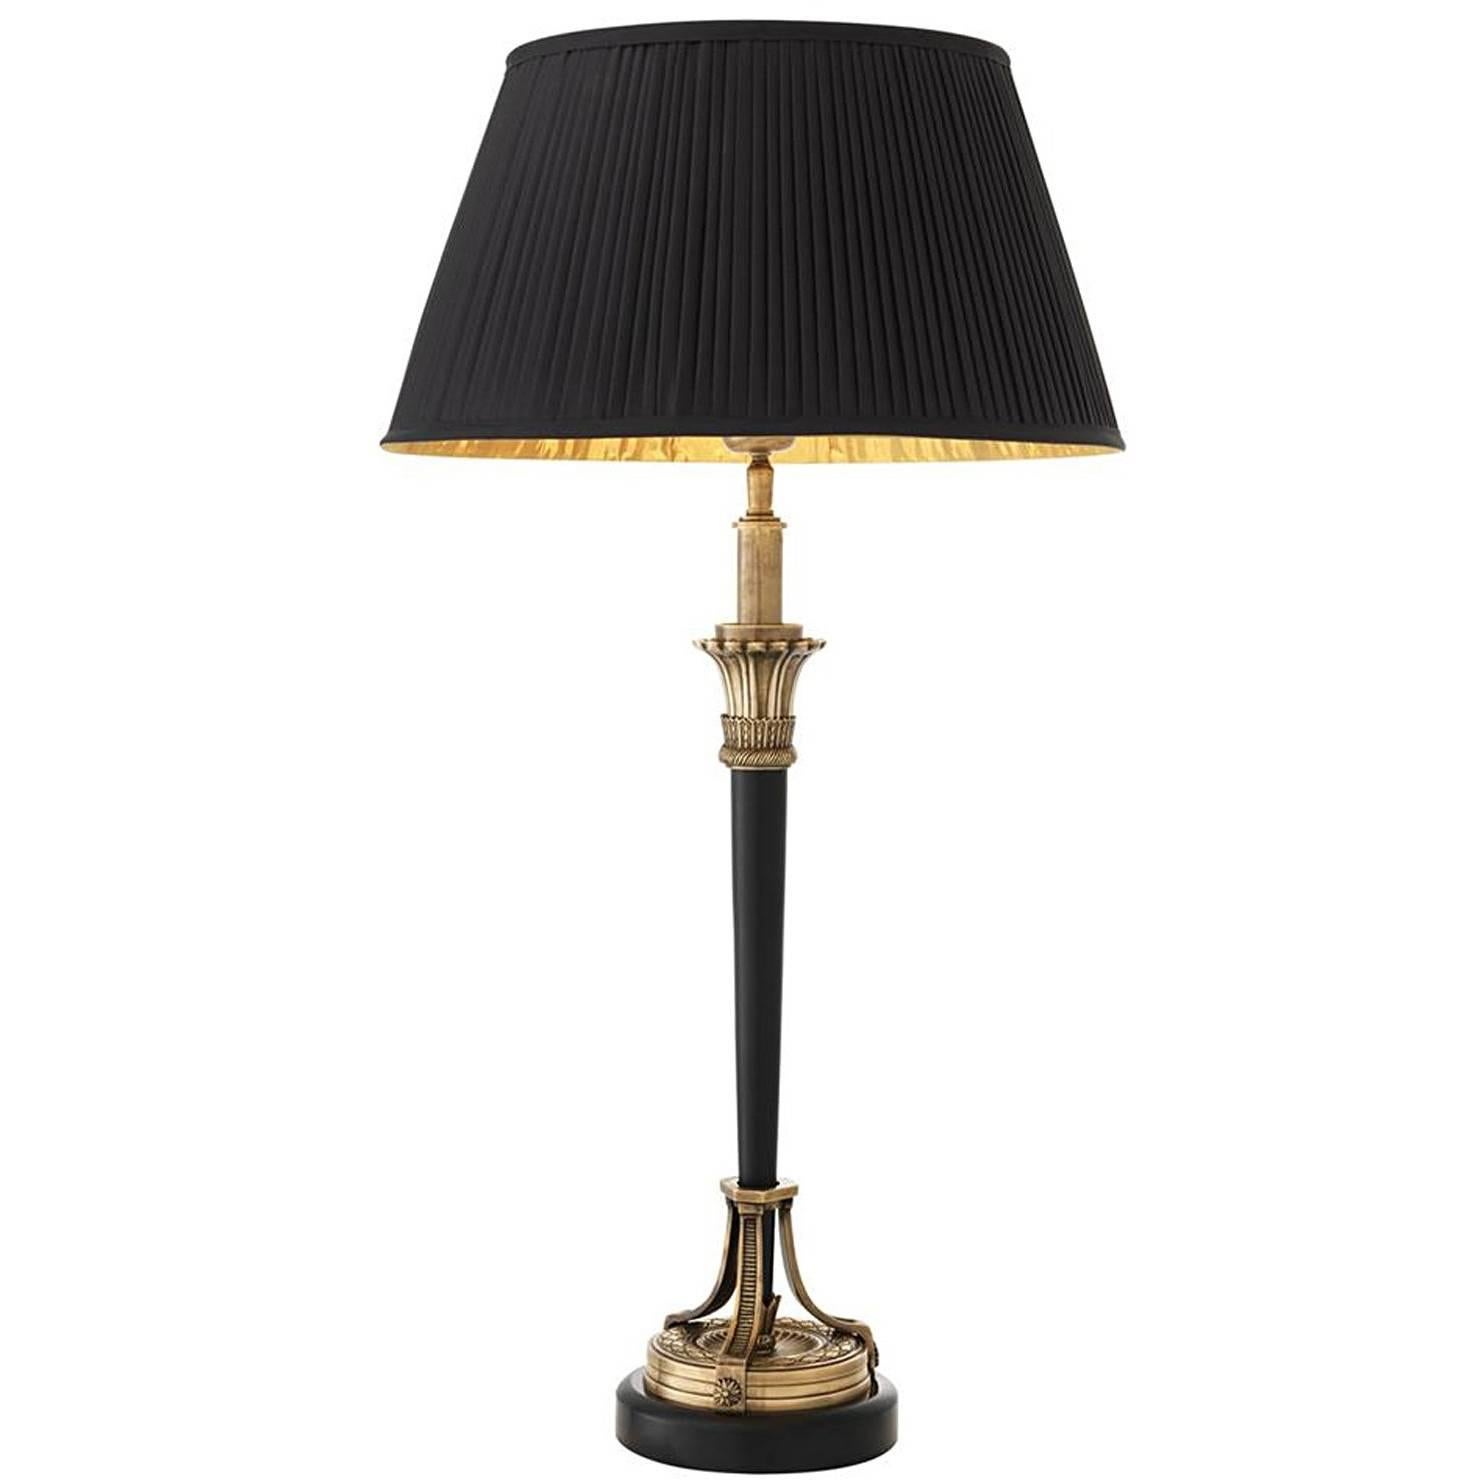 Particulier Table Lamp in Vintage Brass Finish and Granite